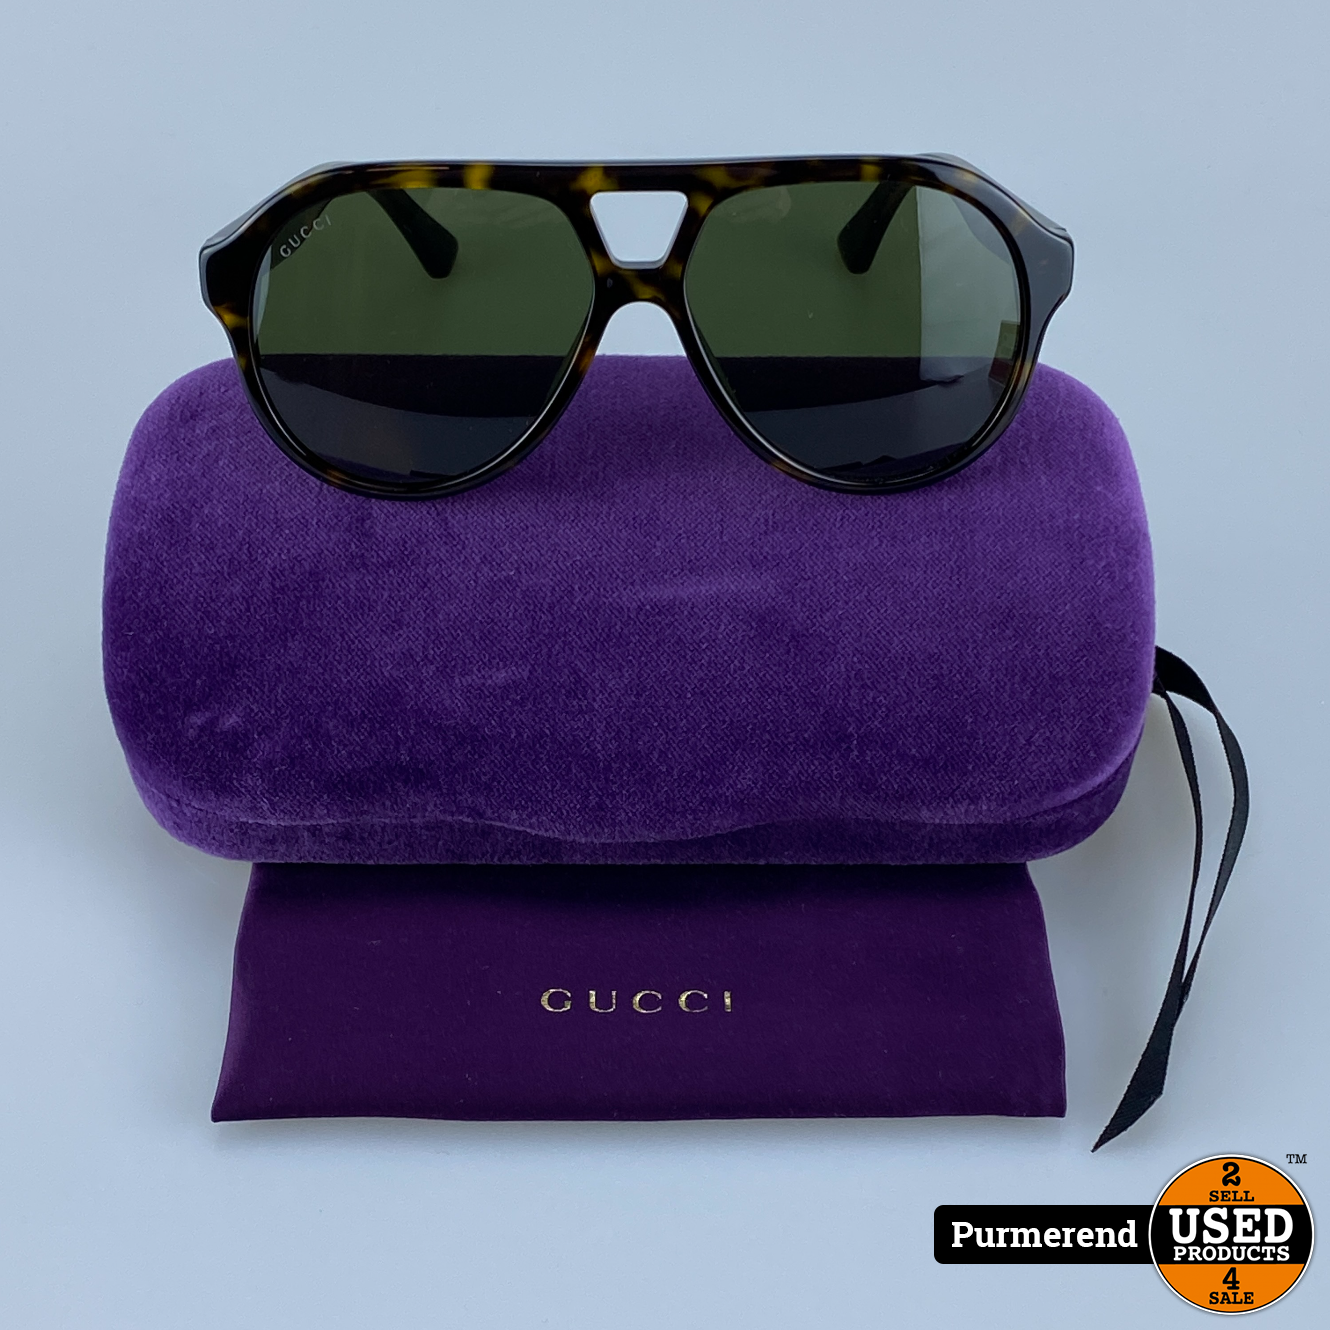 zwart Bezit Succesvol Gucci GG0159S Dames Zonnebril | Nette Staat - Used Products Purmerend